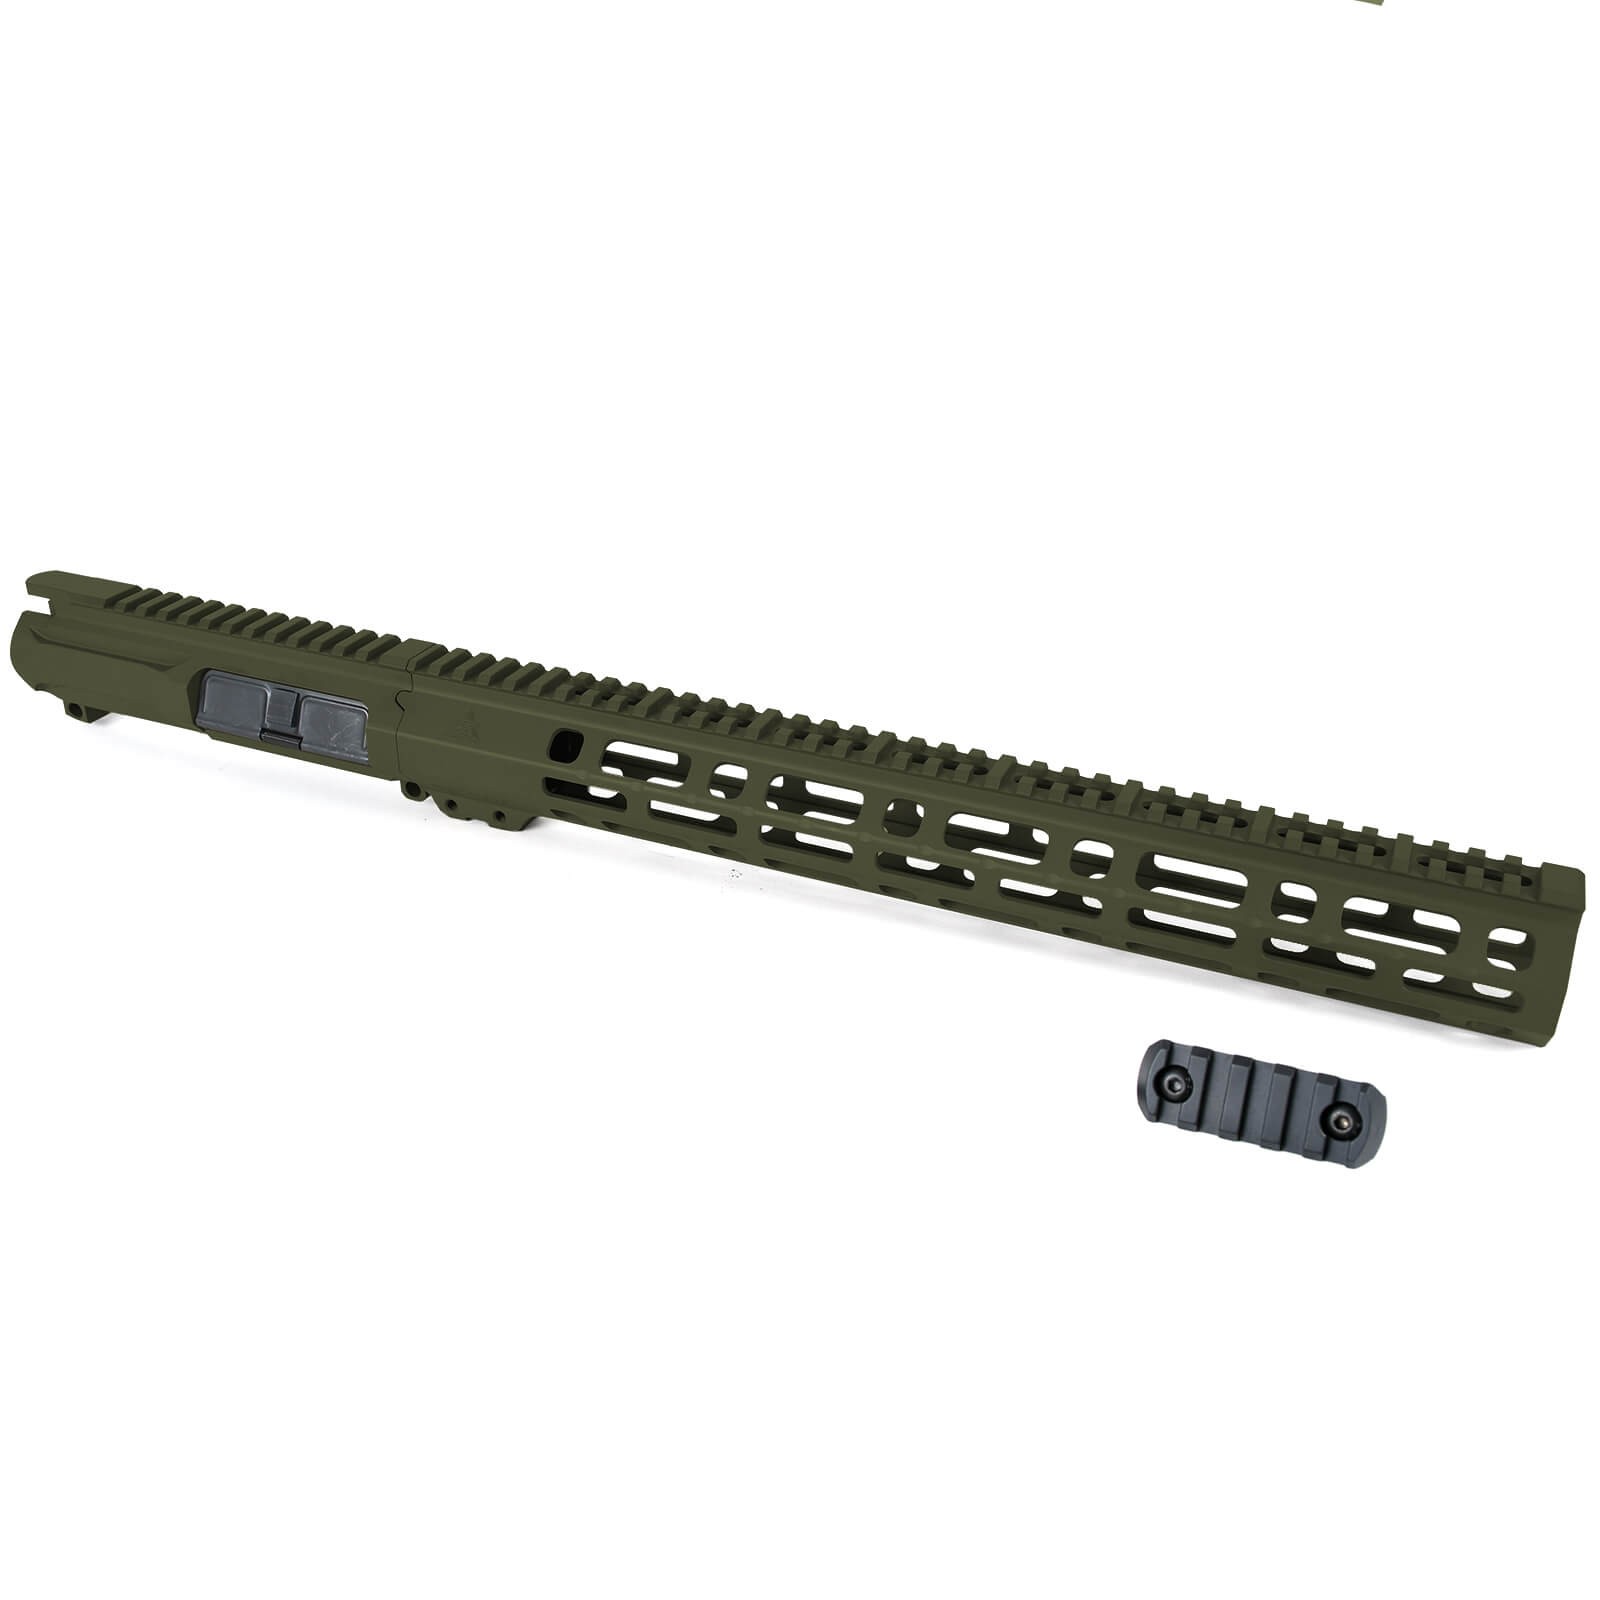 AT3™ AR 15 Upper Receiver and SPEAR Handguard Combo